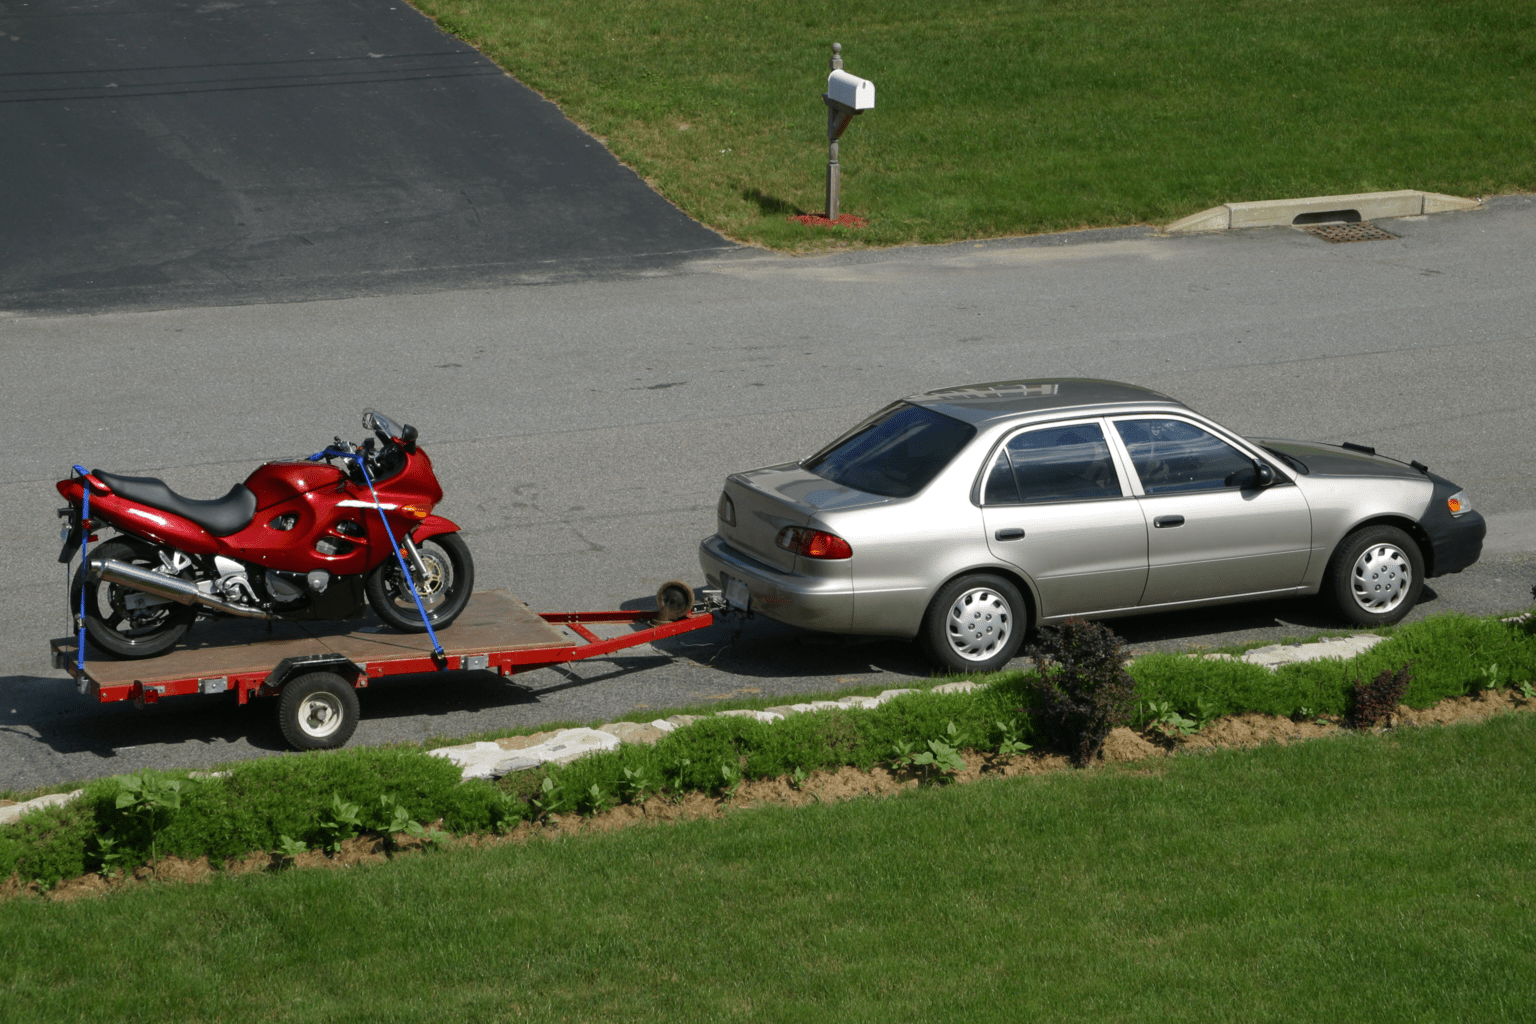 this image shows motorcycle towing in Parker, CO